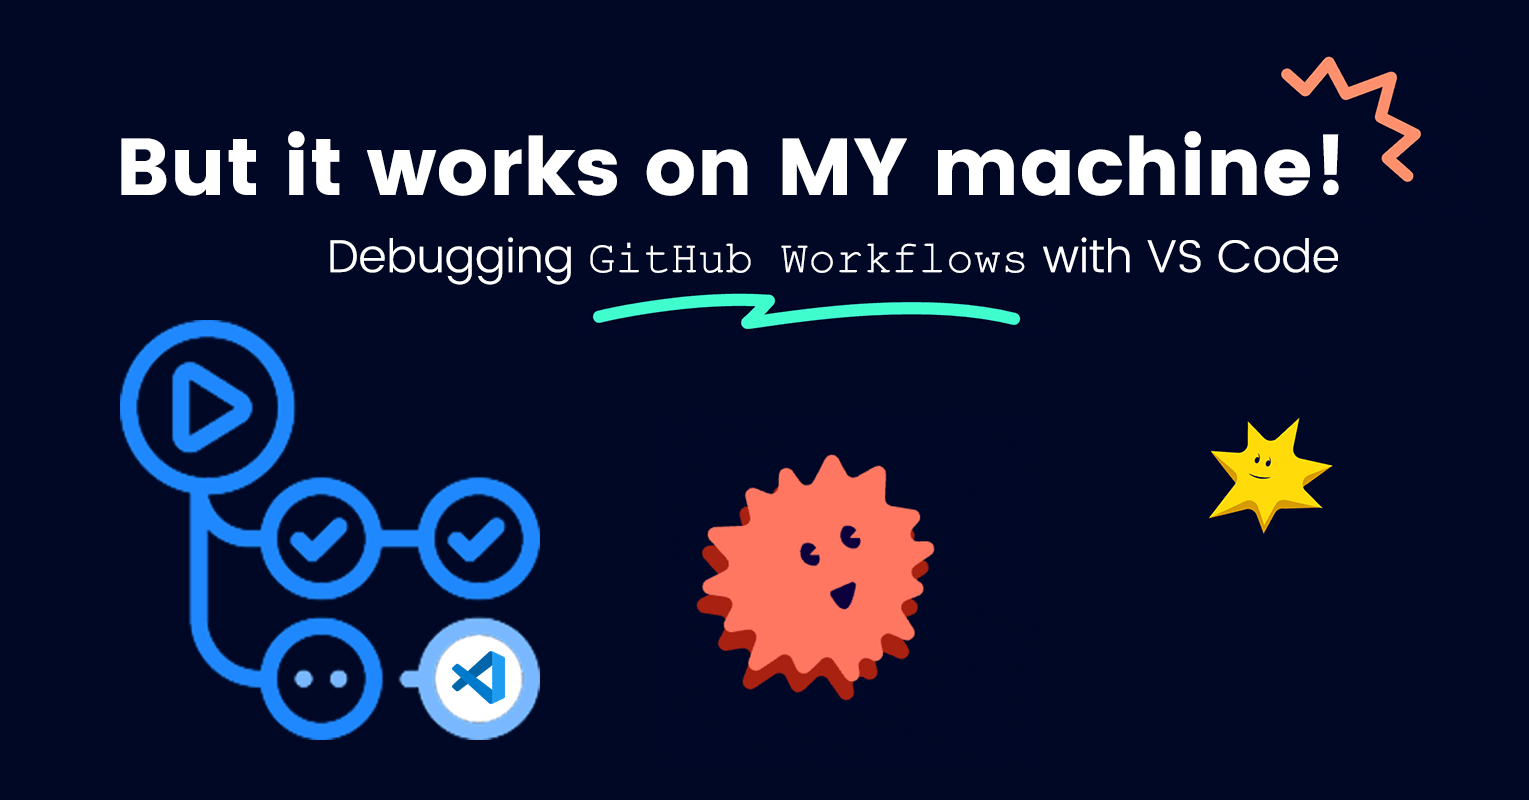 But it works on MY machine! Debugging GitHub Workflows with VS Code.